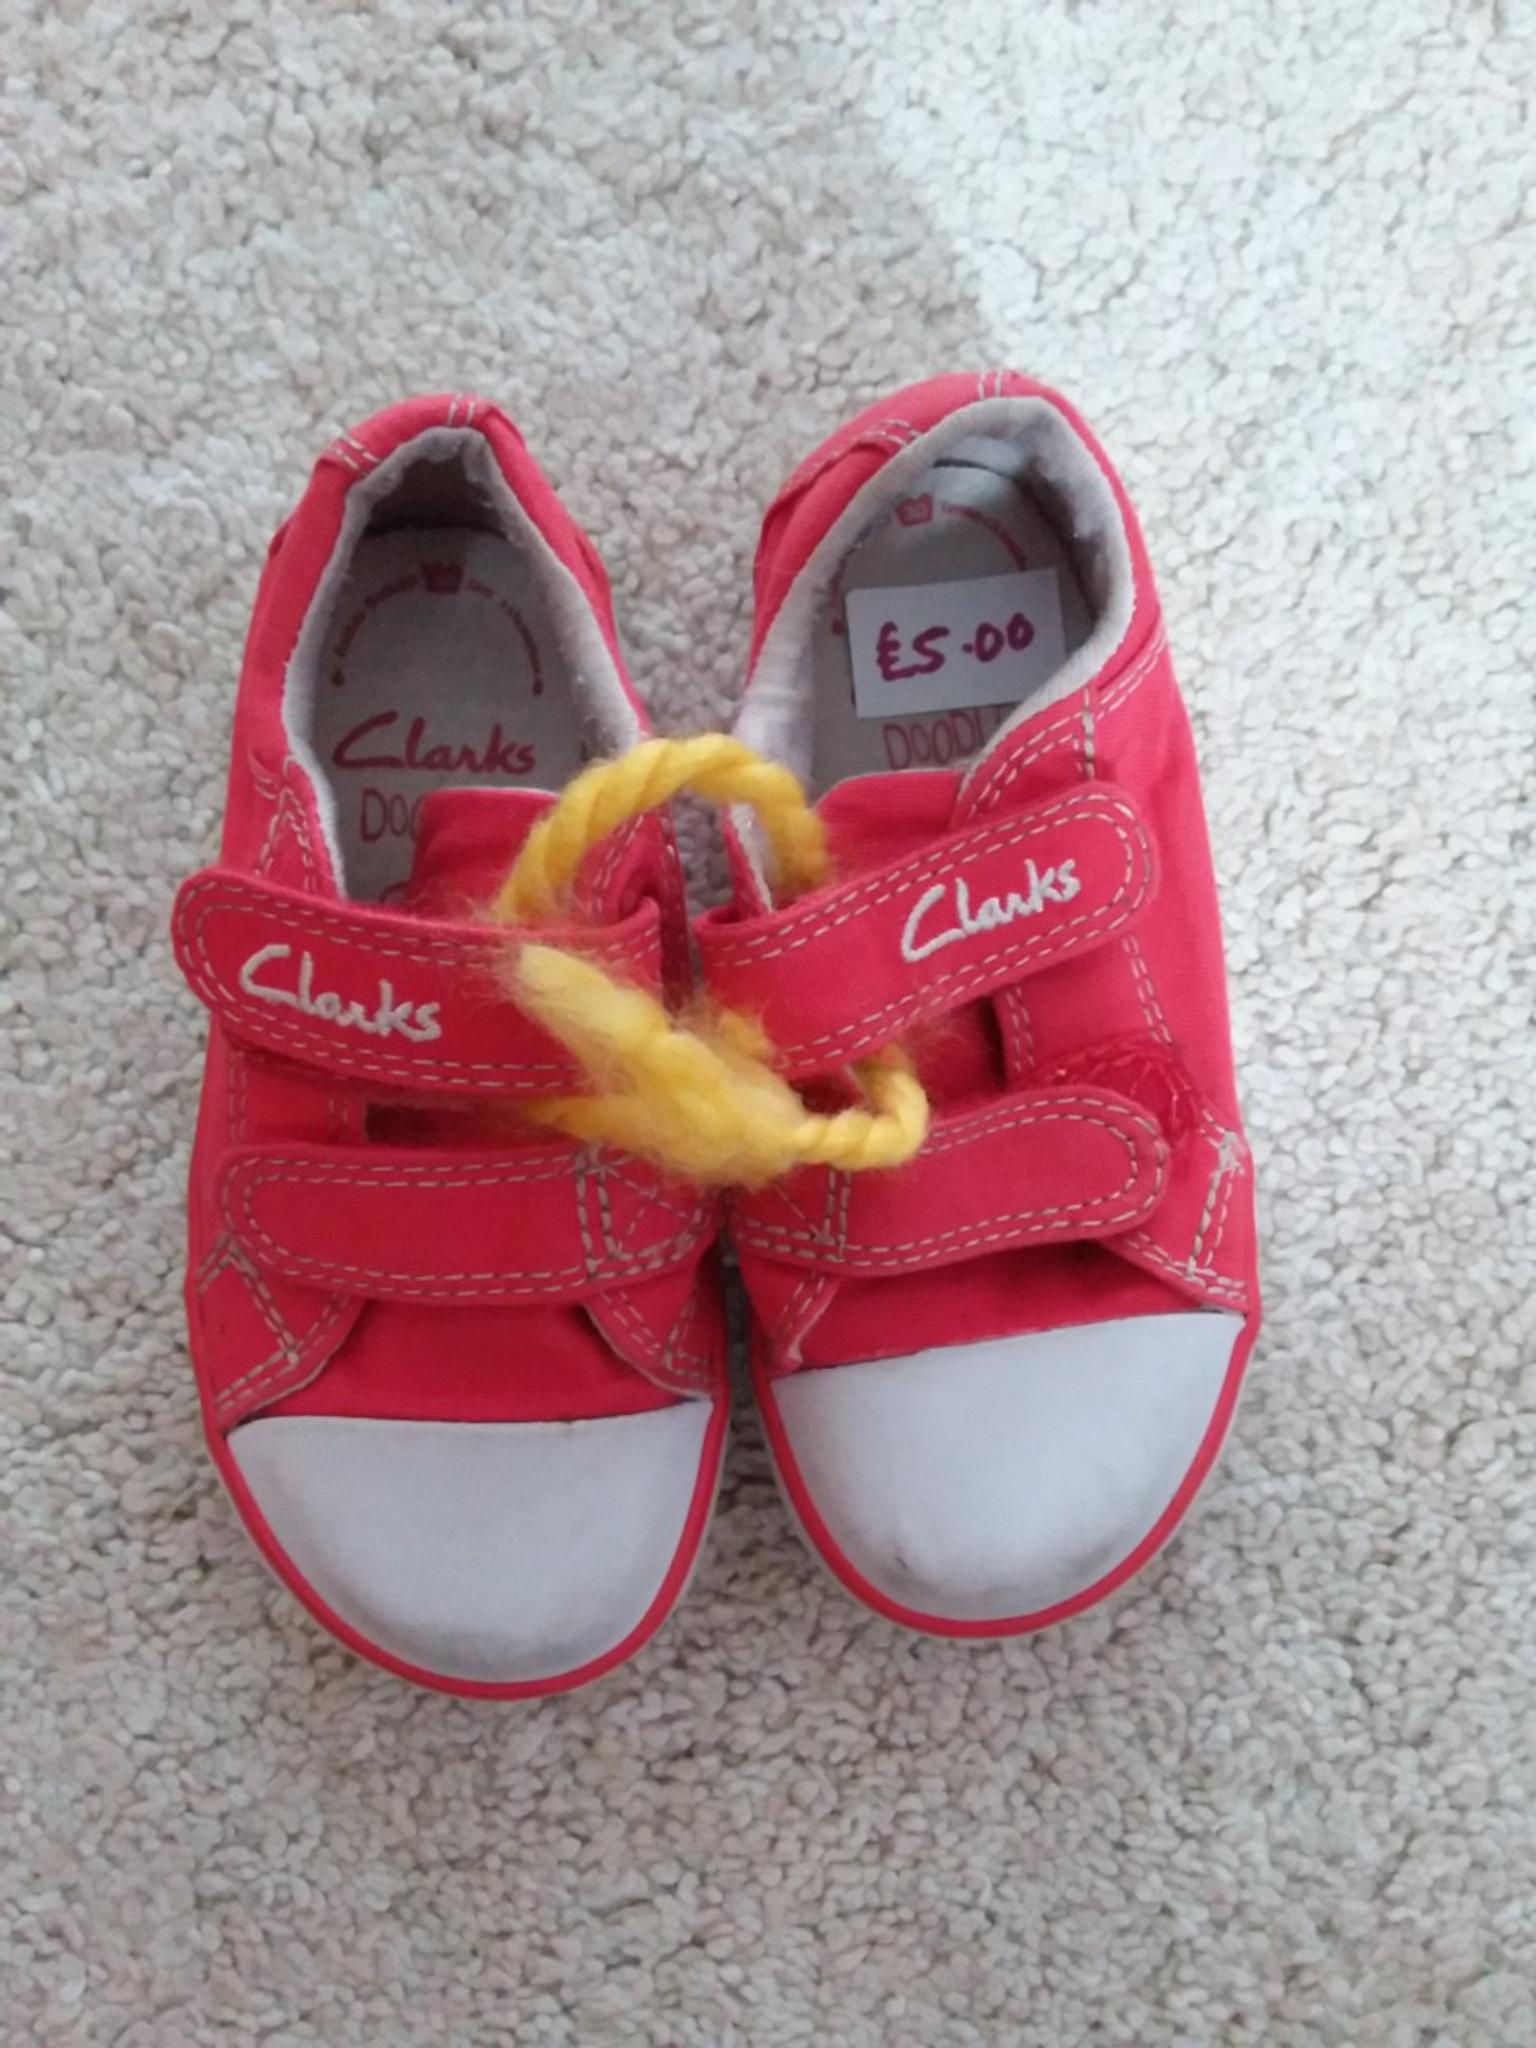 clarks shoes size 6f